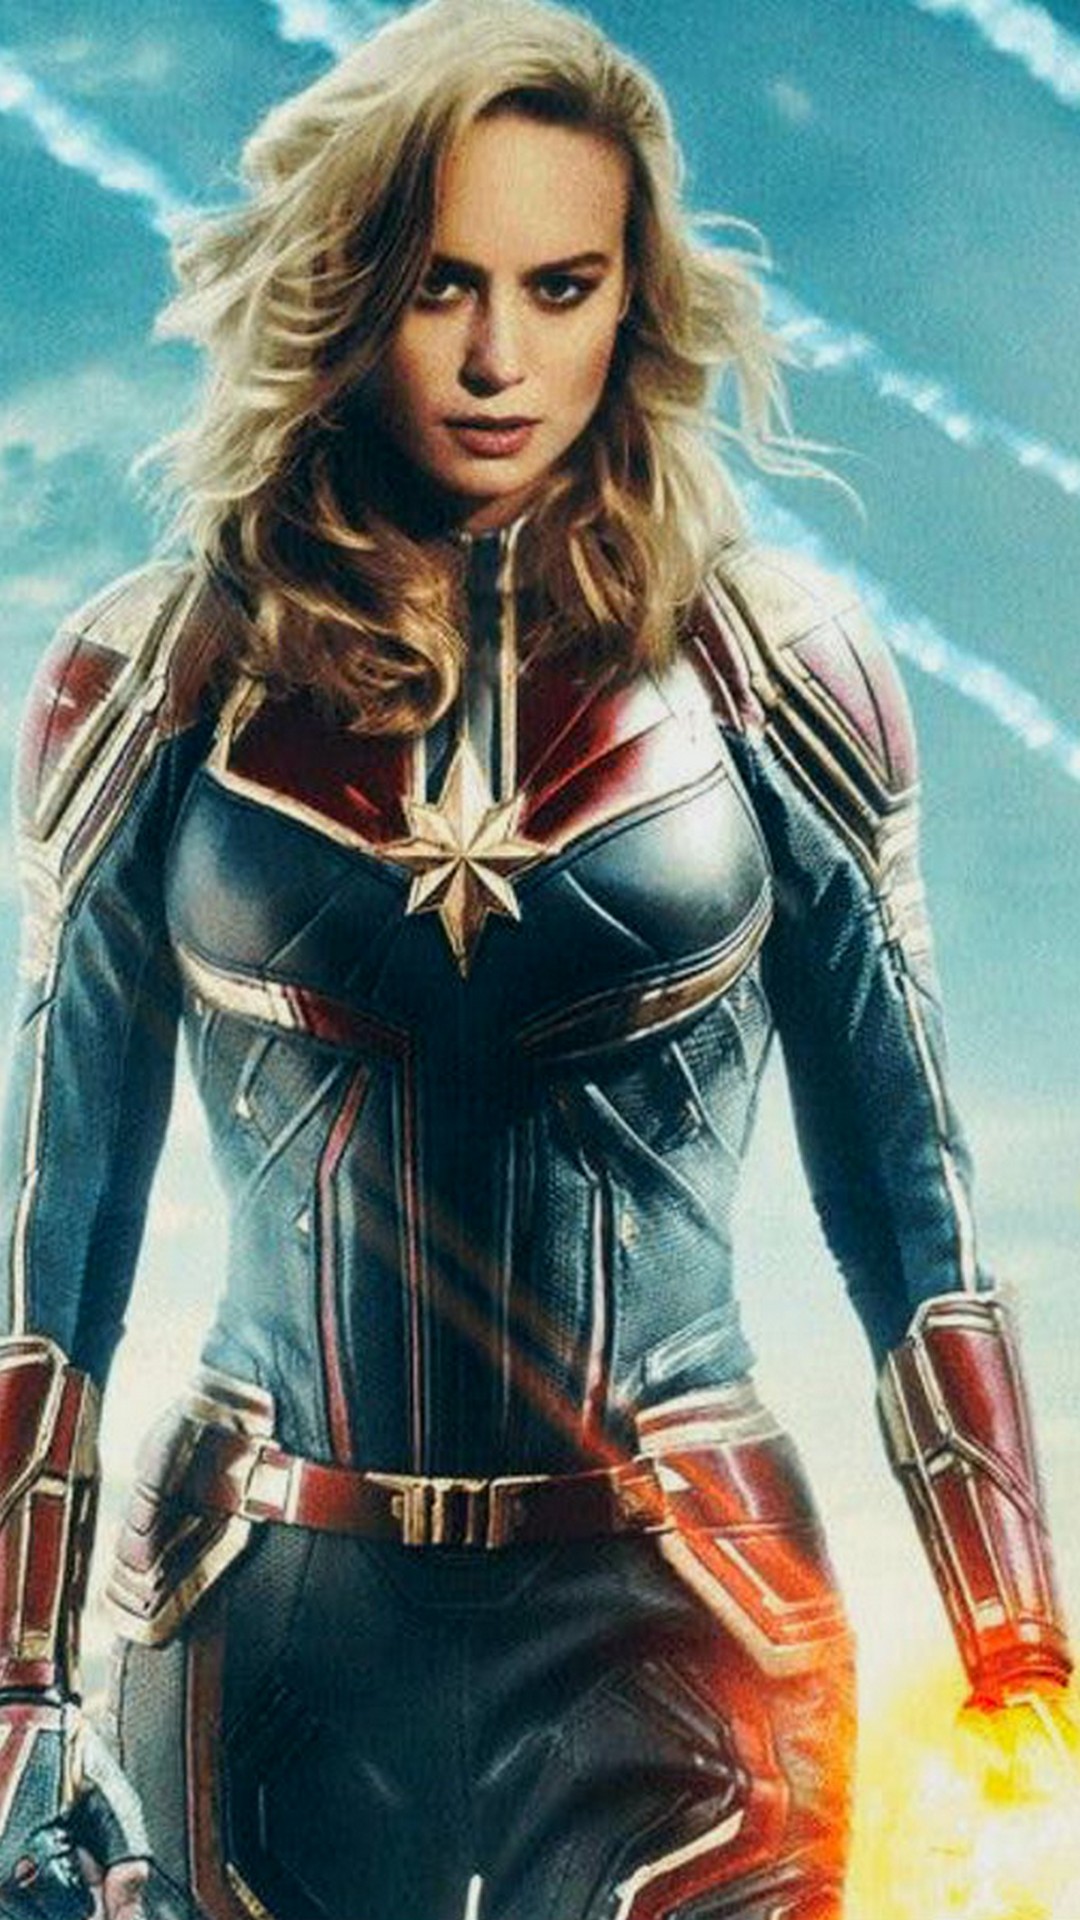 iPhone 8 Wallpaper Captain Marvel with high-resolution 1080x1920 pixel. You can use this wallpaper for your iPhone 5, 6, 7, 8, X backgrounds, Mobile Screensaver, or iPad Lock Screen